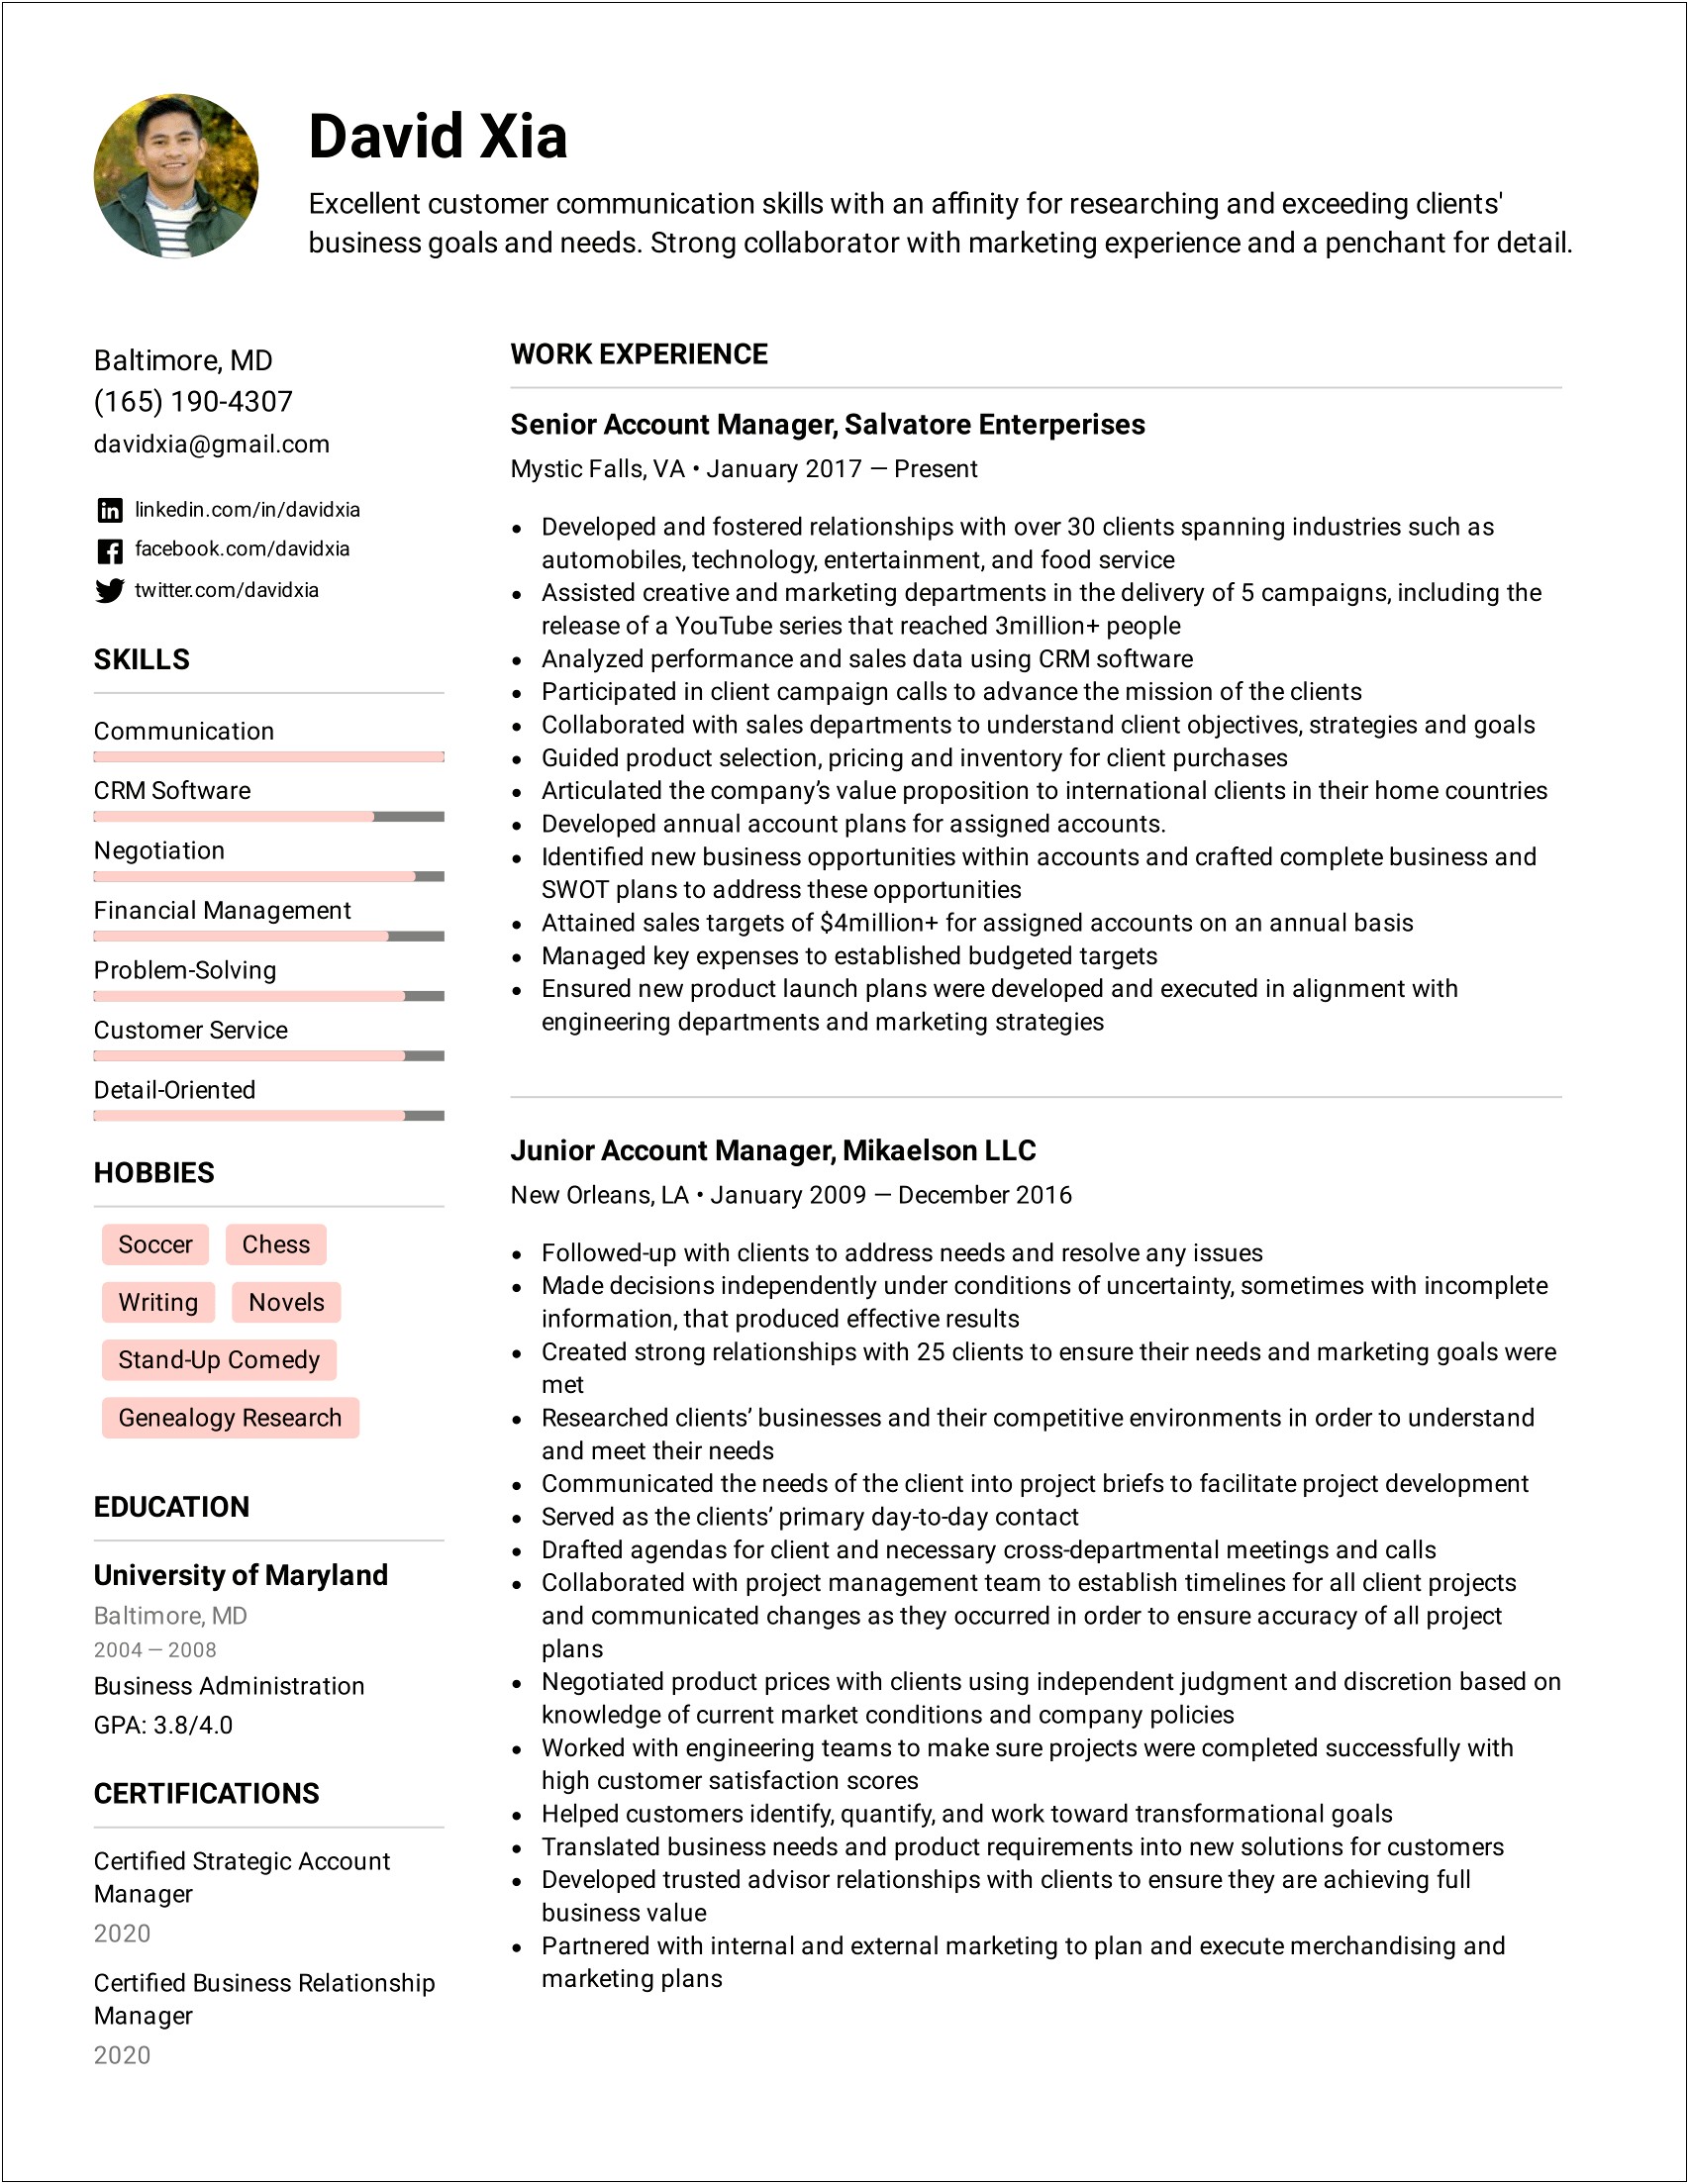 Words For Excellent Communication On Resume